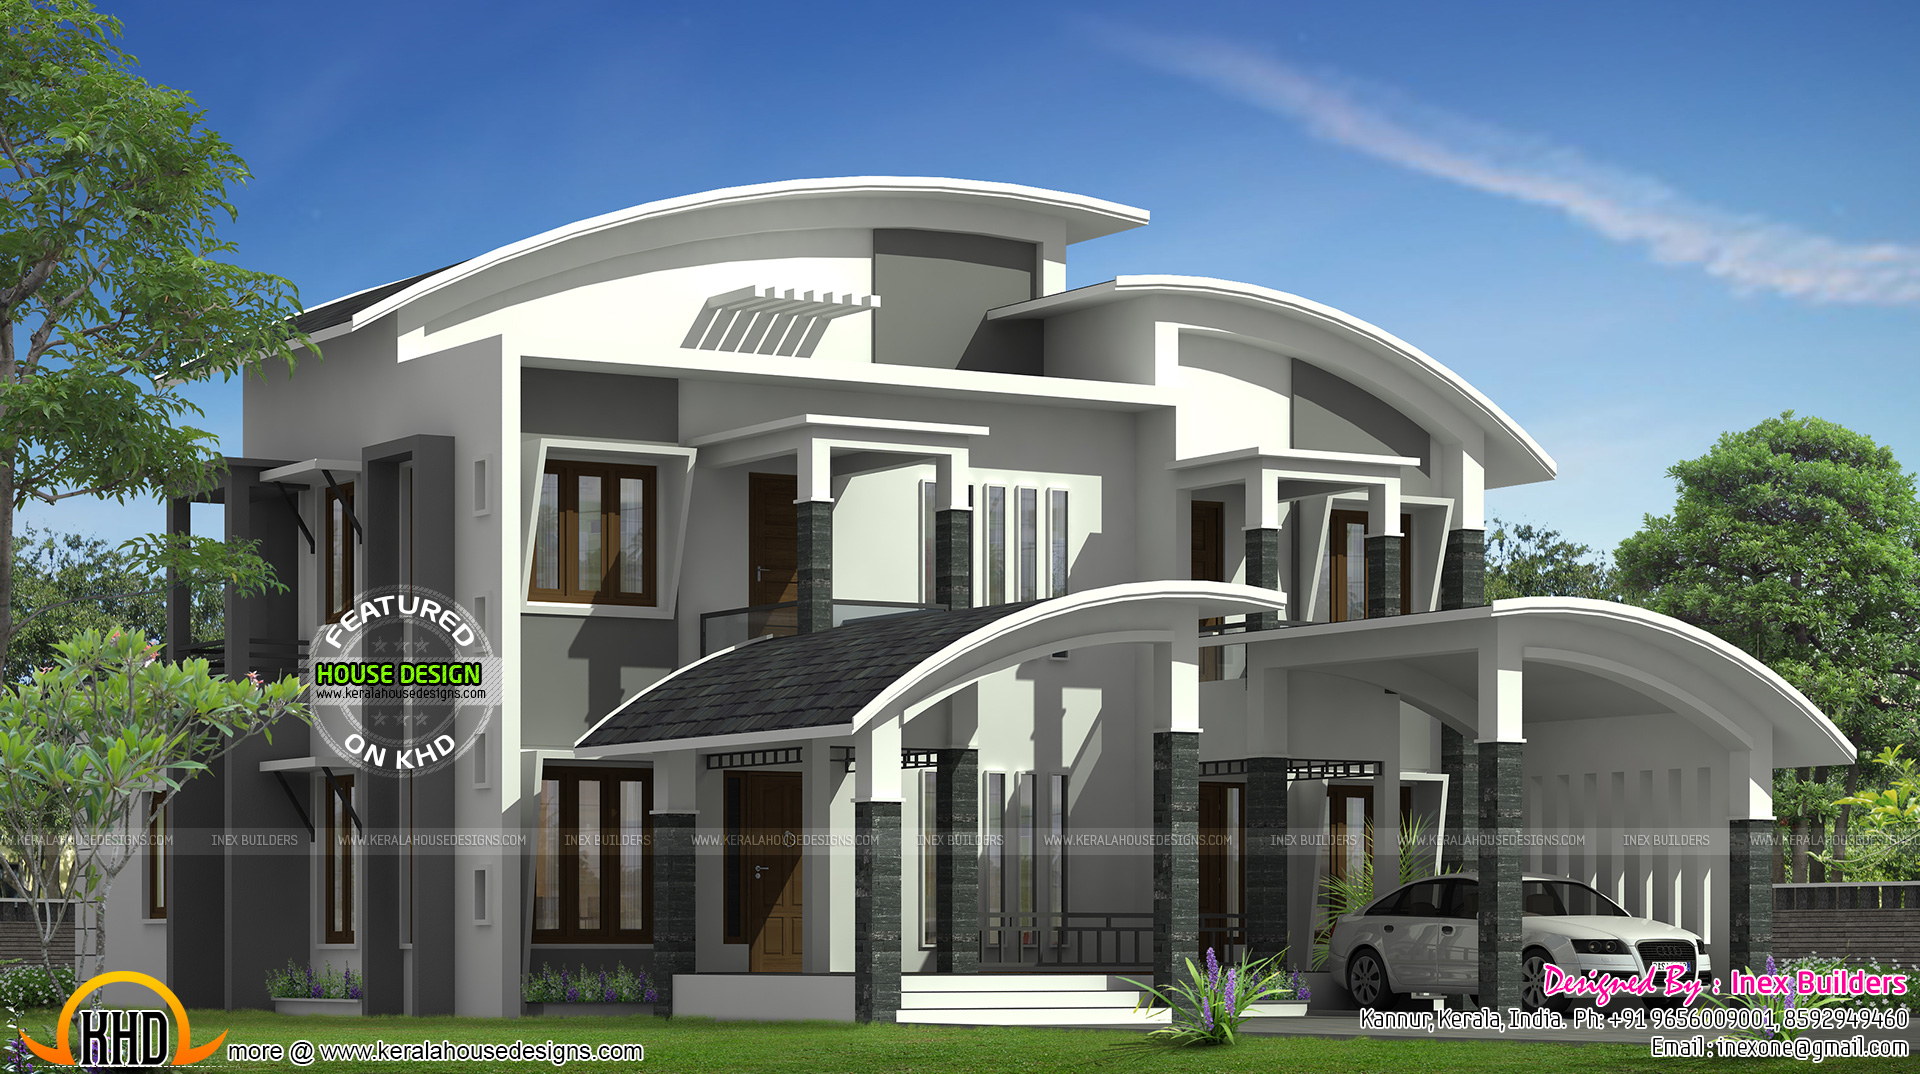 Curved roof house plan Kerala home design and floor plans